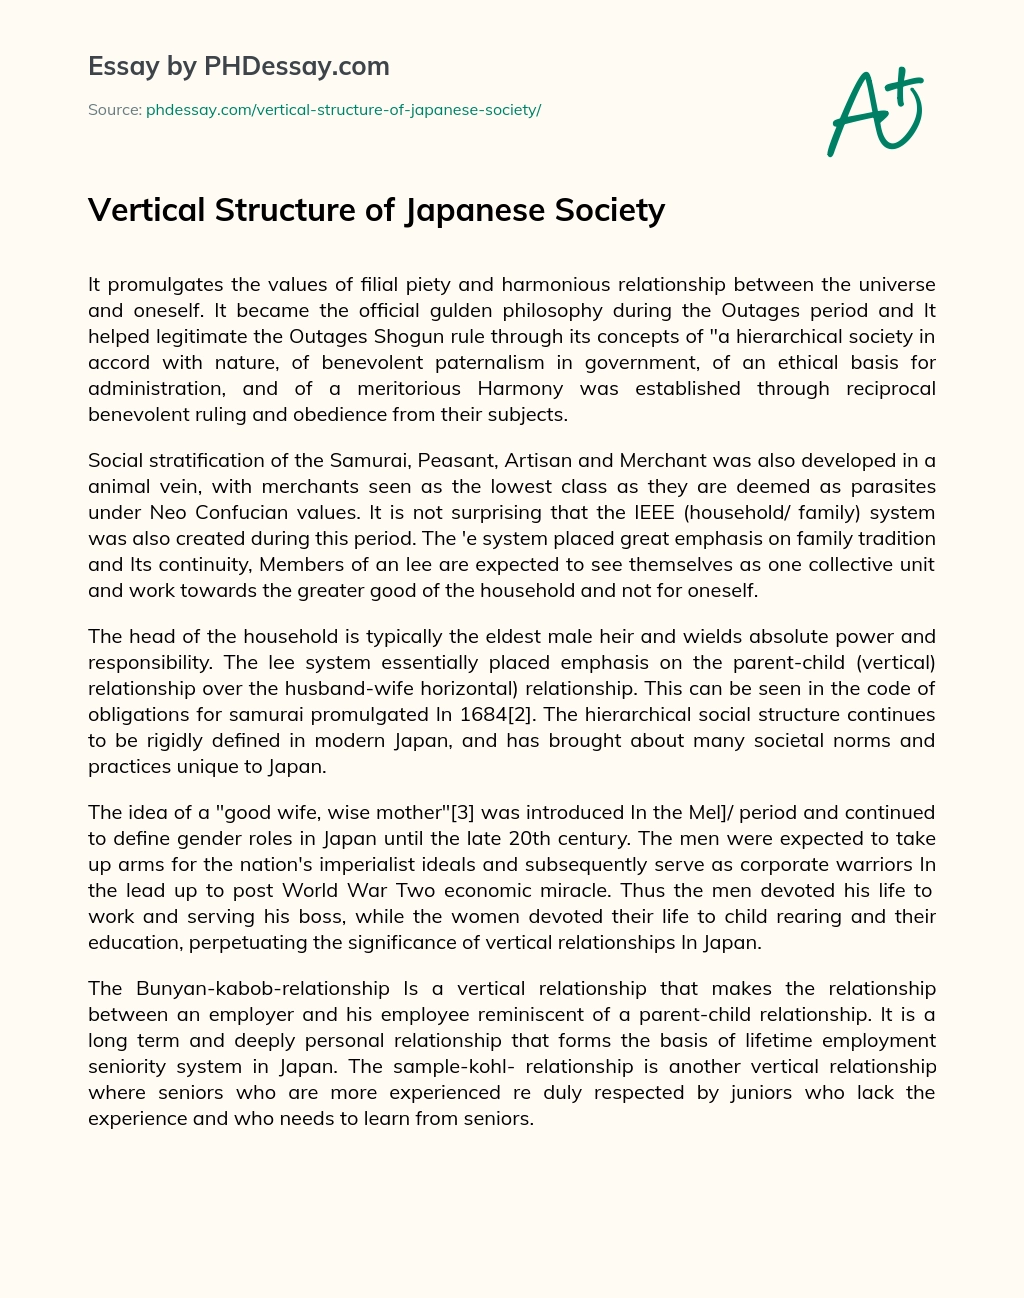 Vertical Structure of Japanese Society essay